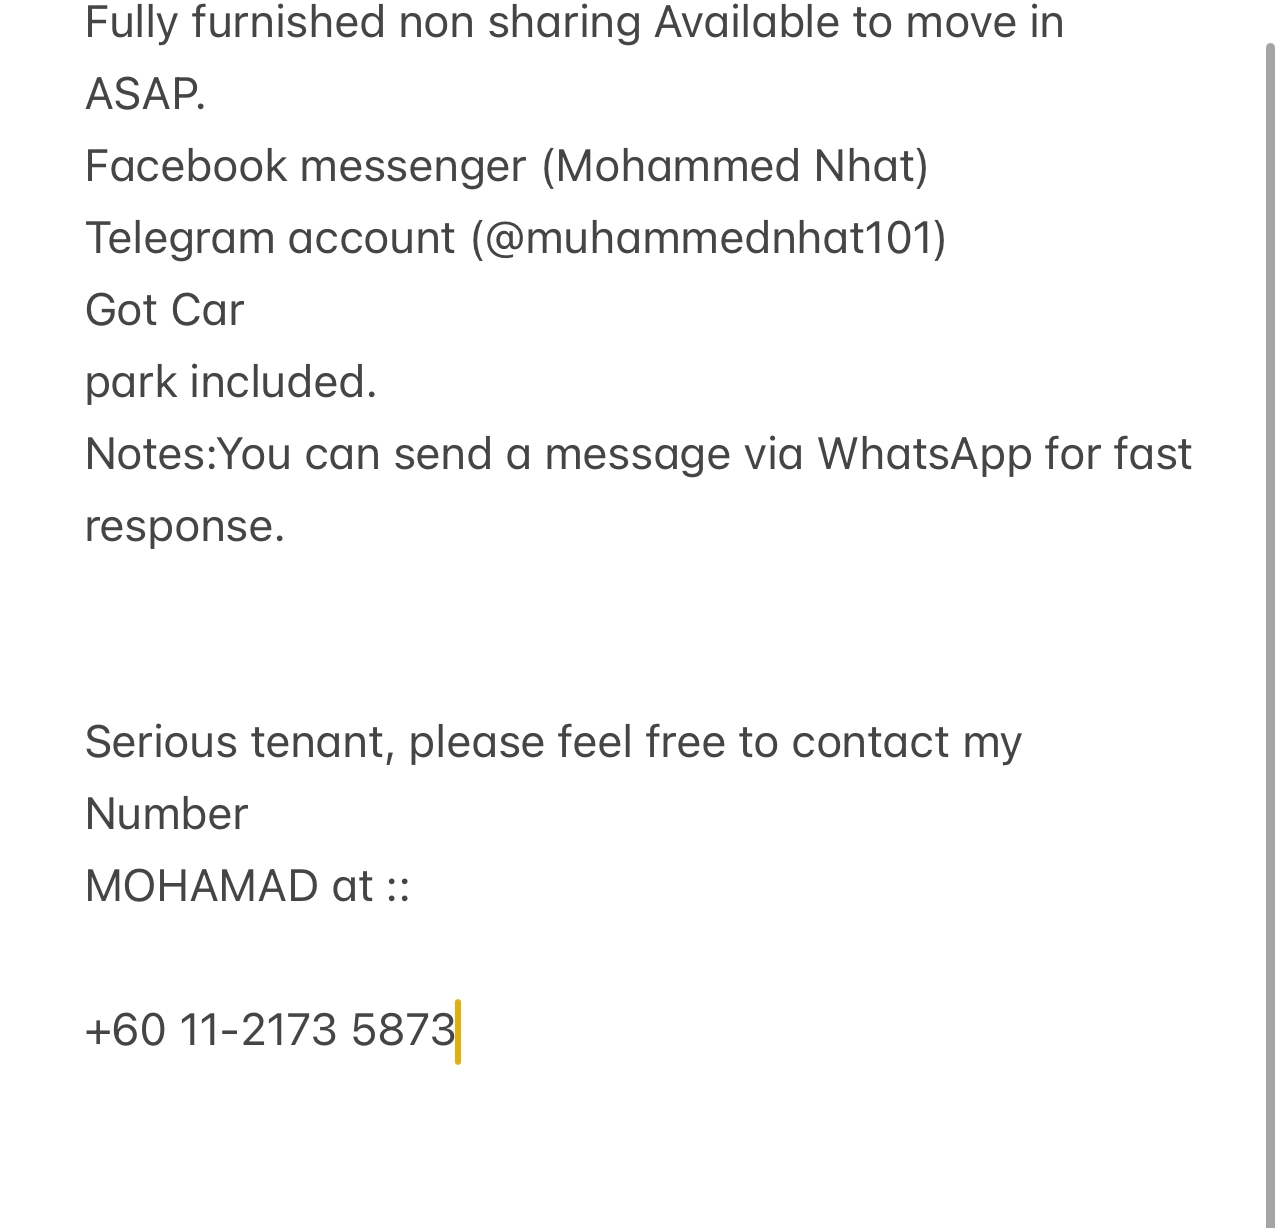 room for rent, master room, jalan odp 3, Send the owner a message on WhatsApp/facebook if you want to RENT the unit facebook (Mohammed Nhat)&Telegram(@muhammednhat101) Fully furnished non sharing :(comfortable)